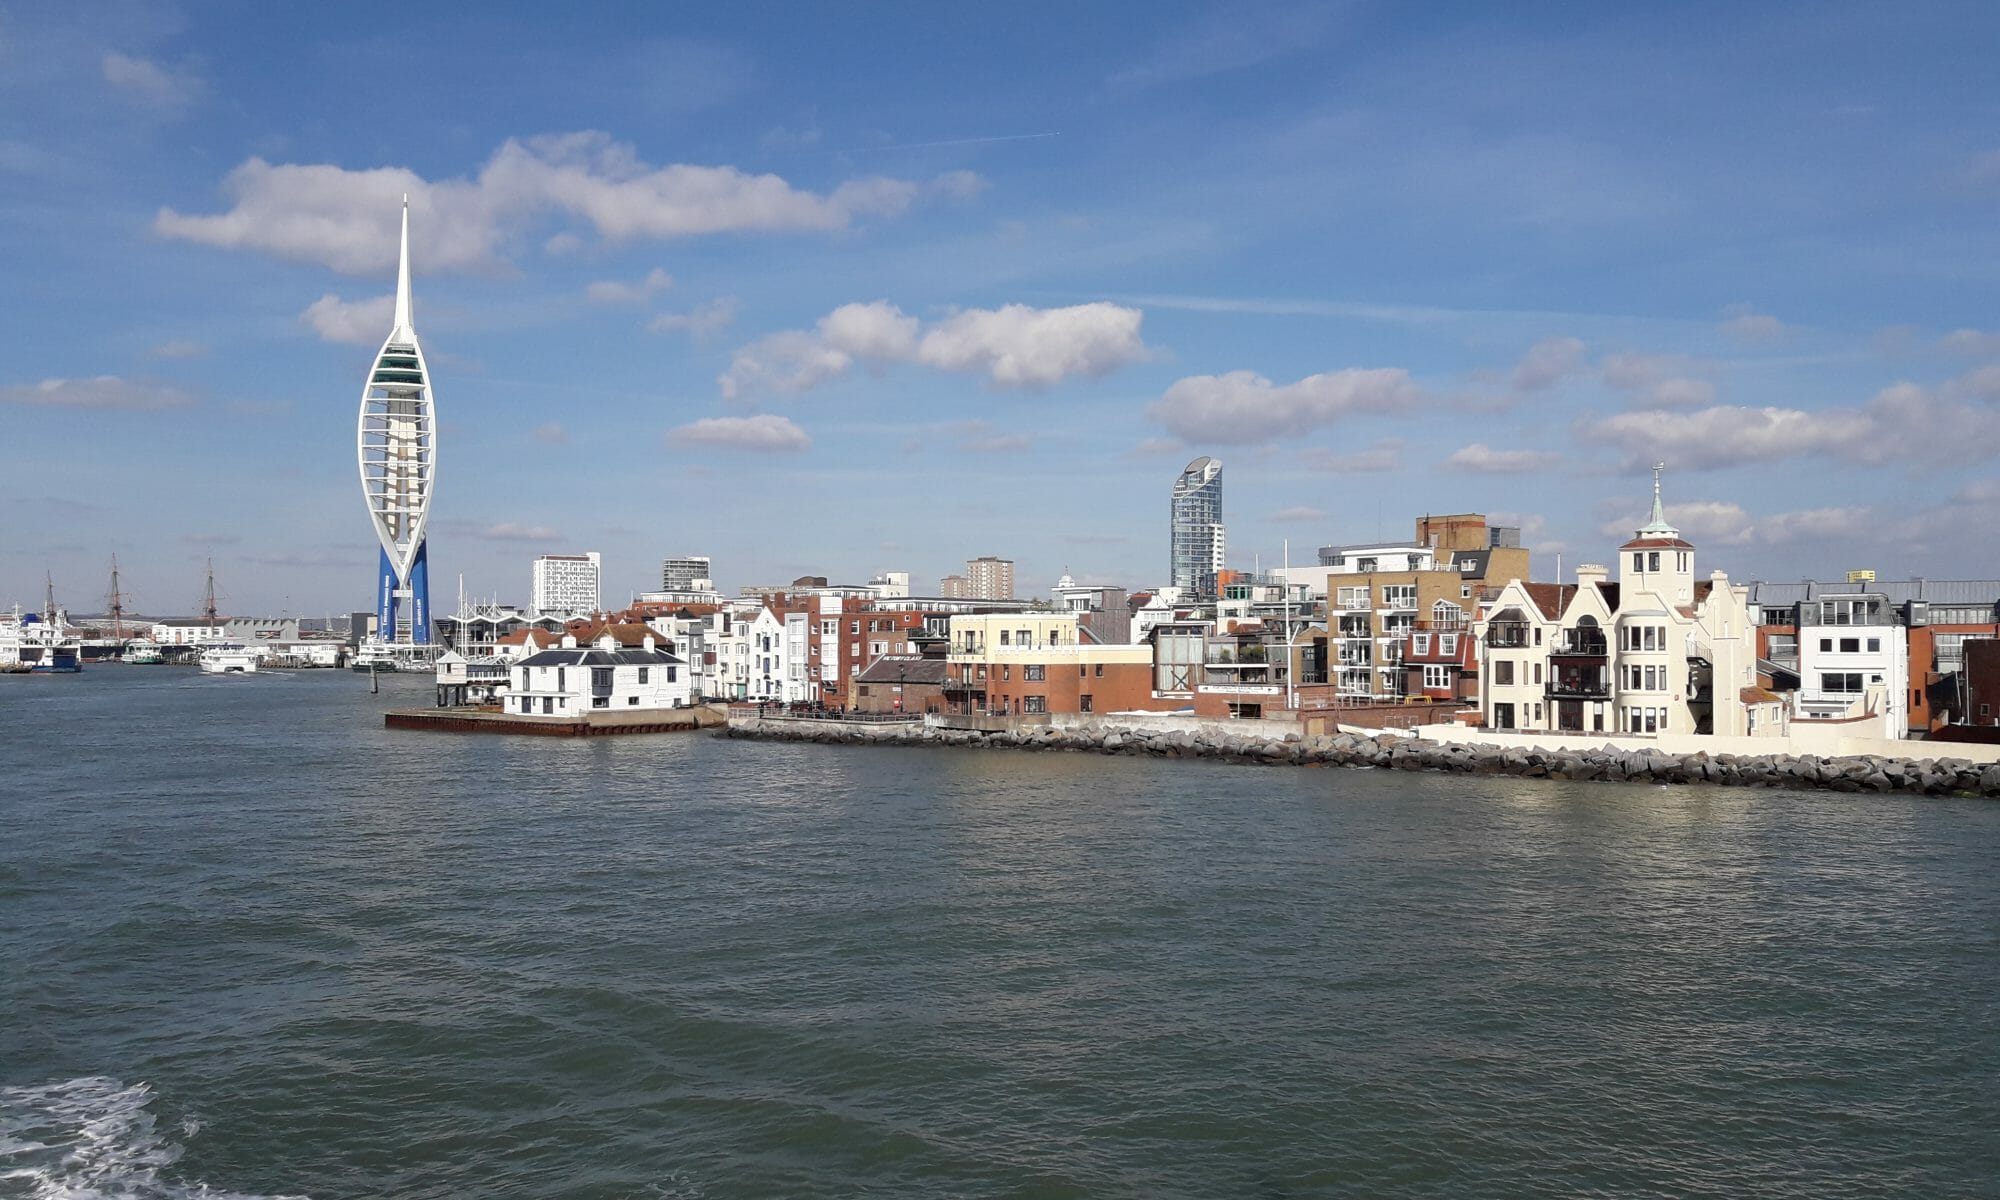 Old Portsmouth and the Spinnaker Tower